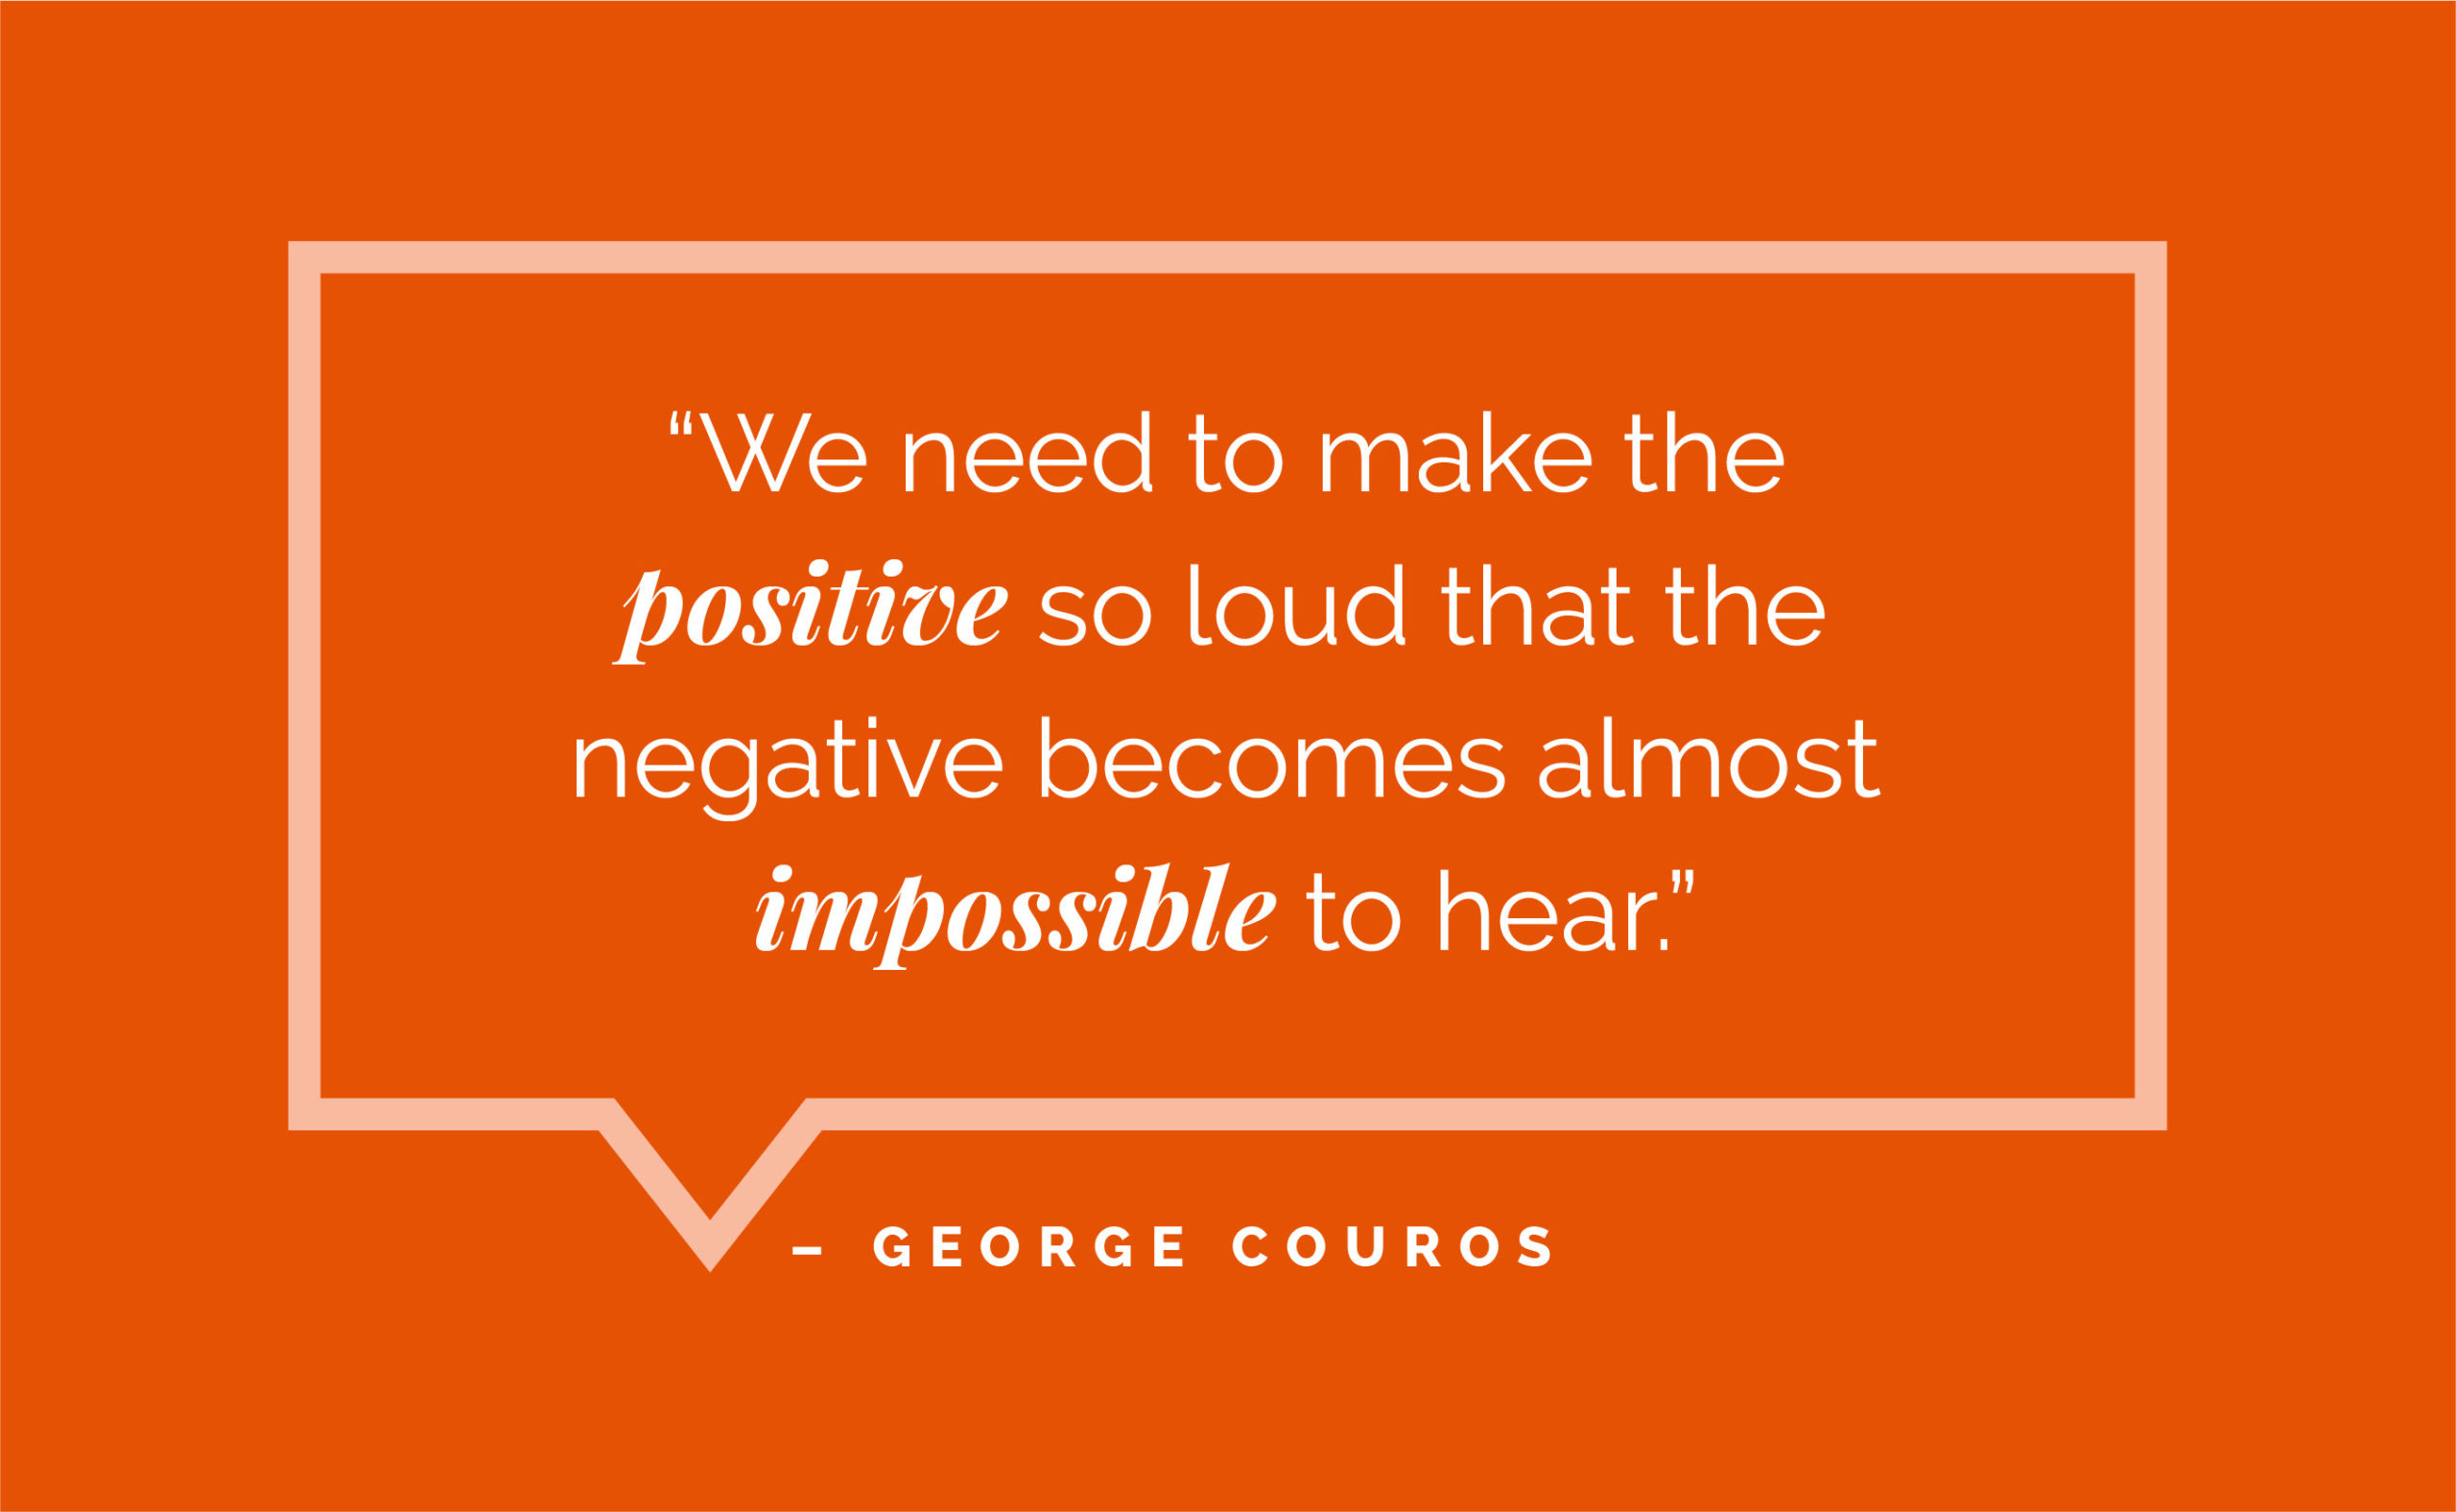 “We need to make the positive so loud that the negative becomes almost impossible to hear.” – George Couros 